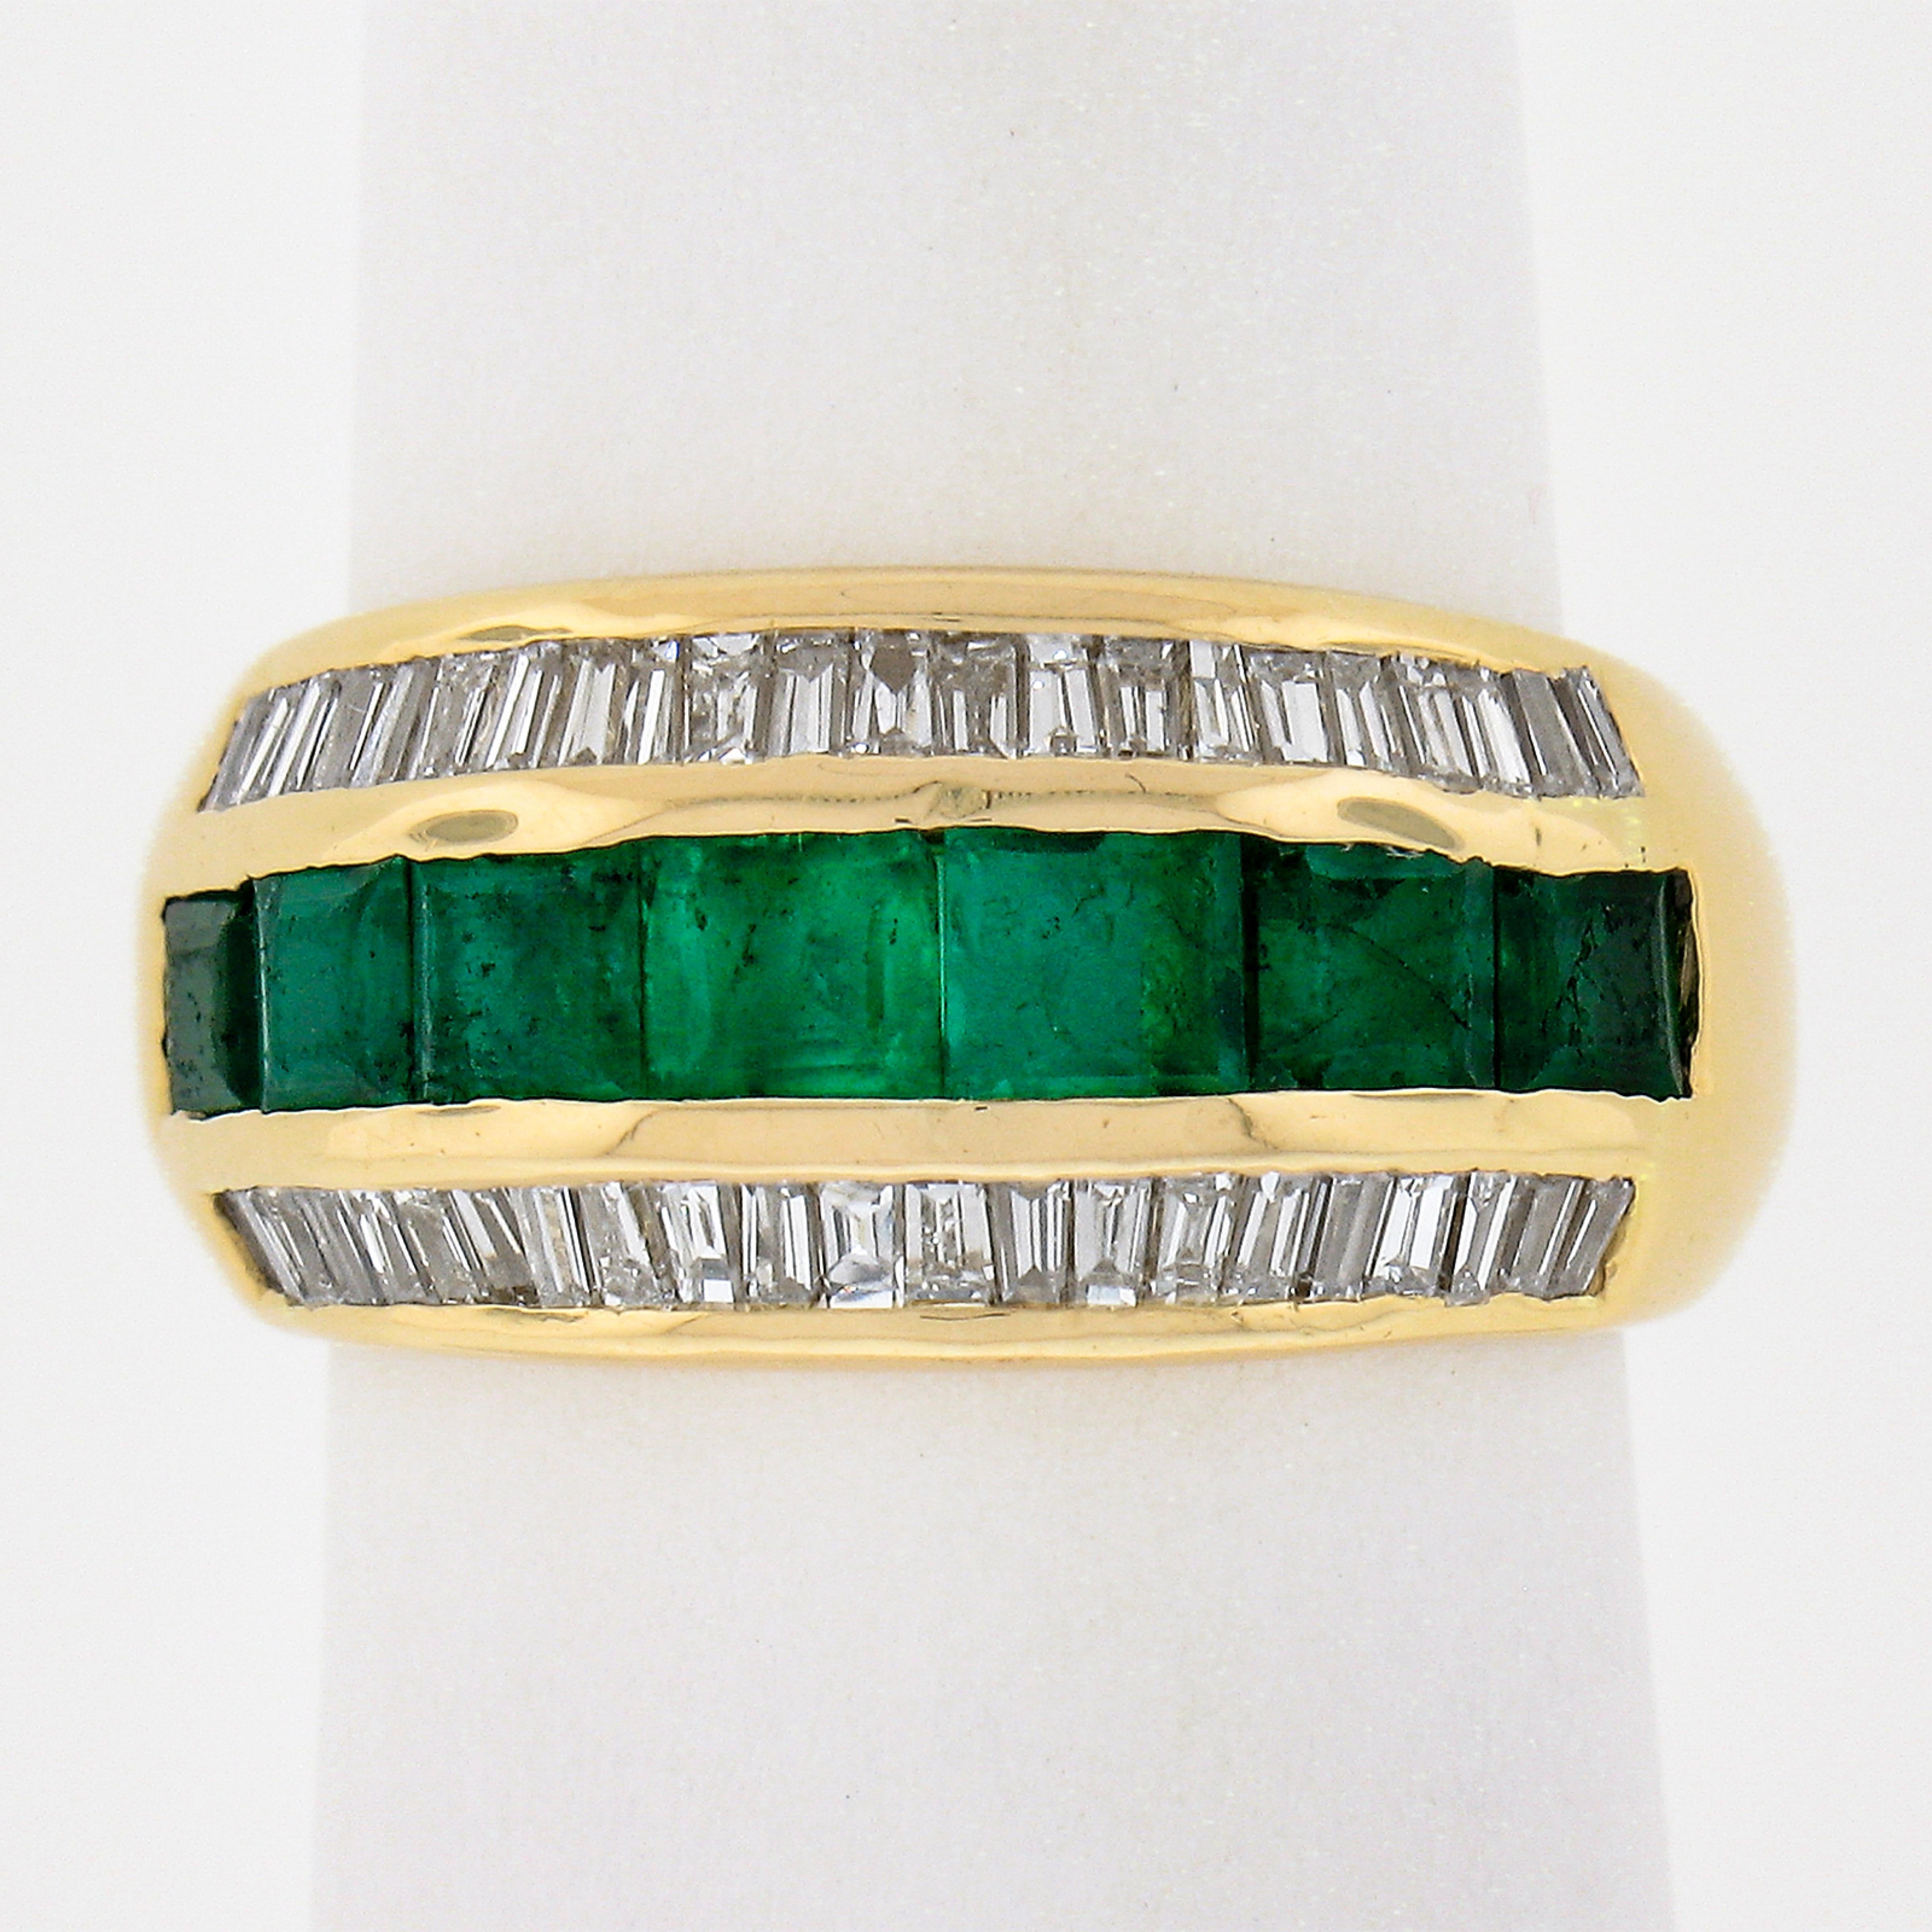 Here we have a vintage 3 row wide slightly domed band ring crafted from solid 18k yellow gold. It features 7 square step cut emeralds across its top that are very nice deep green color. The emeralds are further flanked on either side by tapered